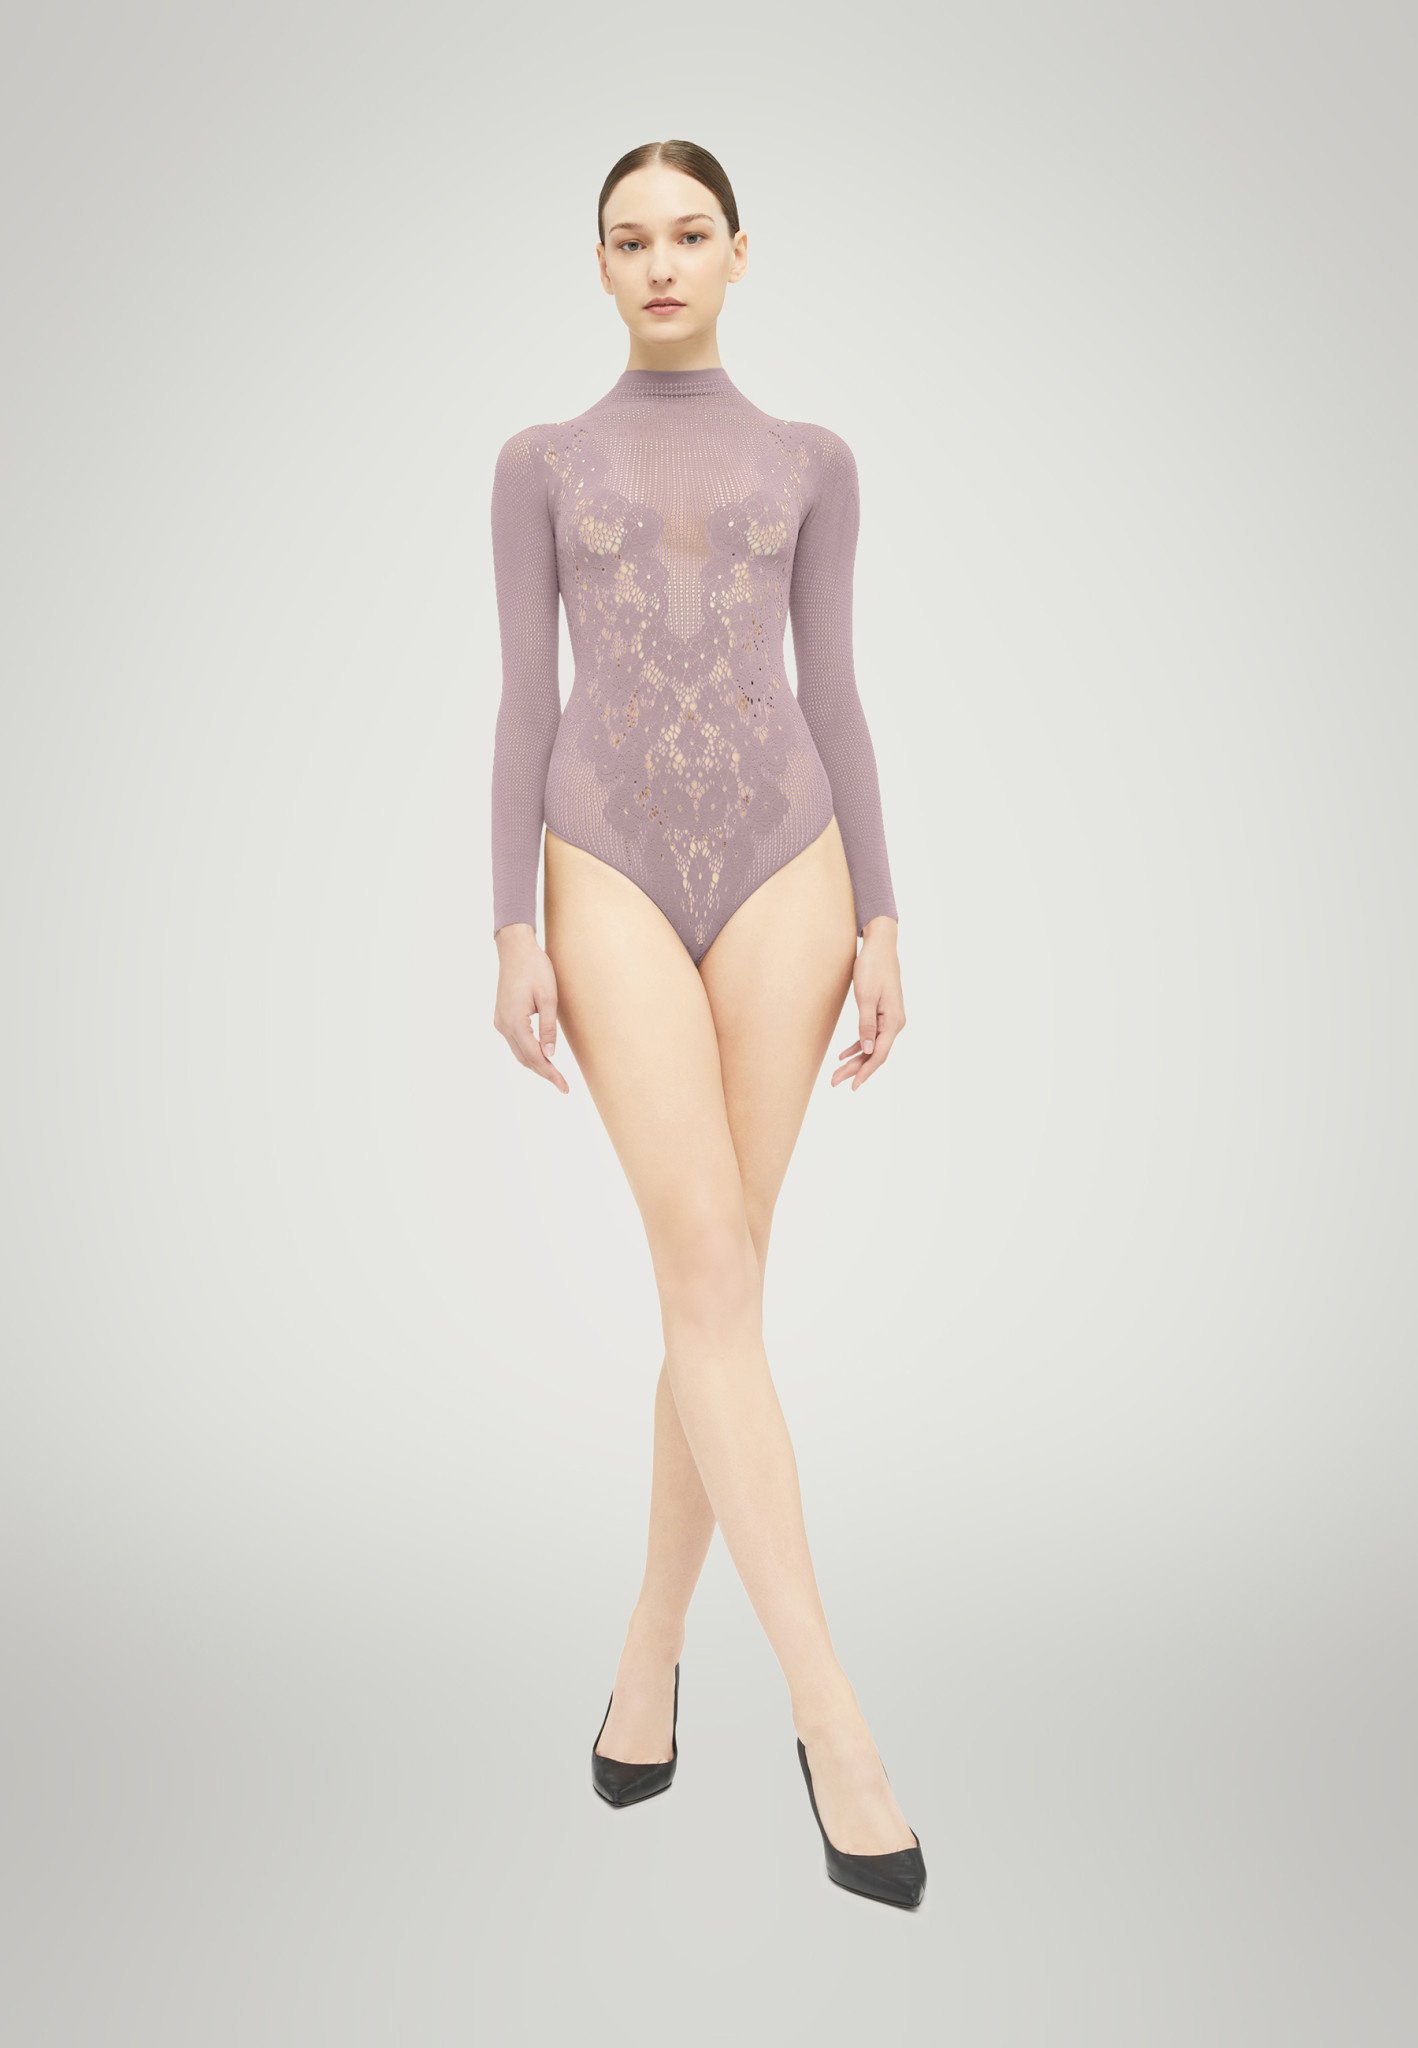 WOLFORD 79293 Flower Lace String Body